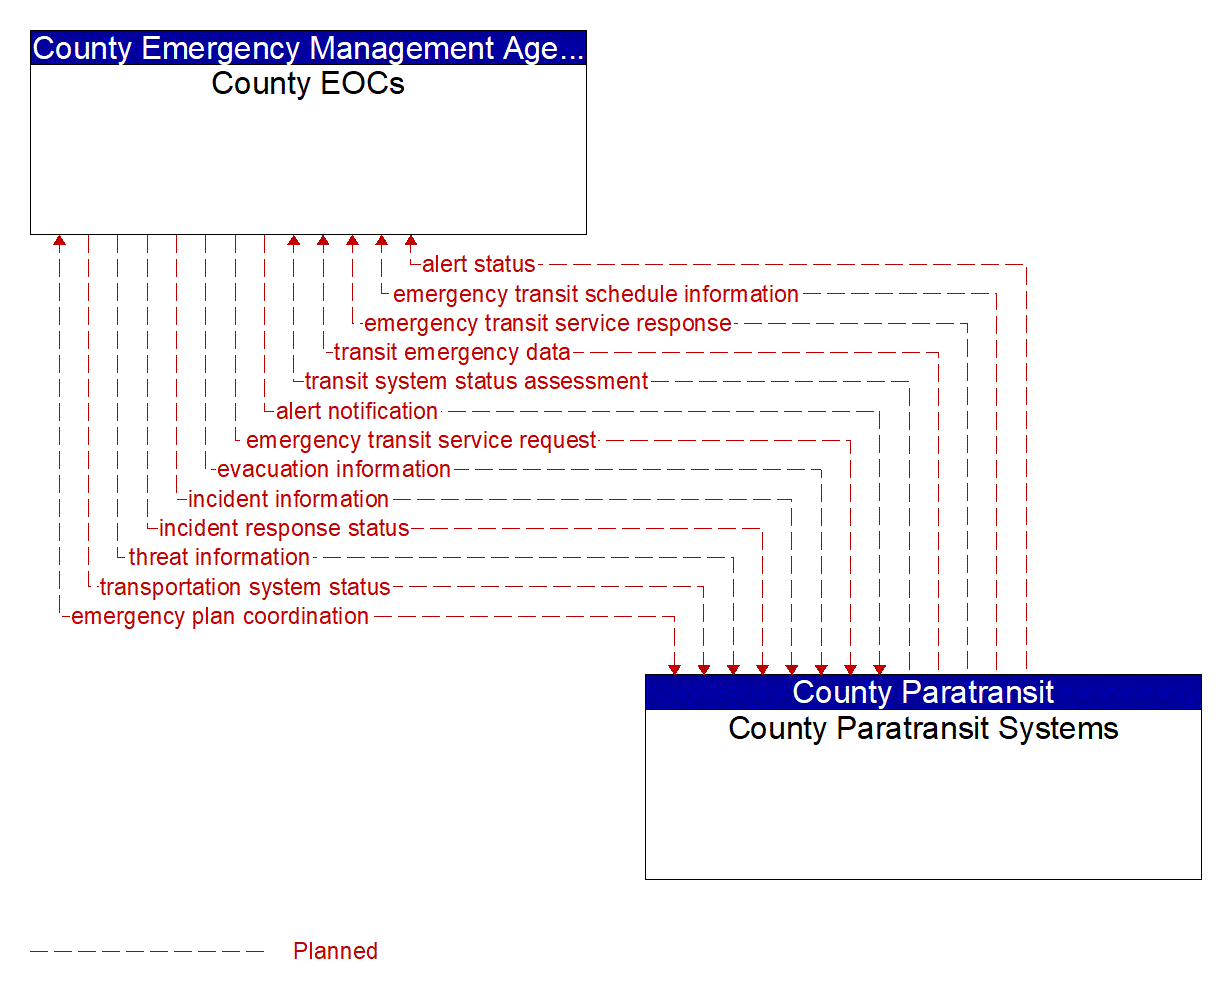 Architecture Flow Diagram: County Paratransit Systems <--> County EOCs